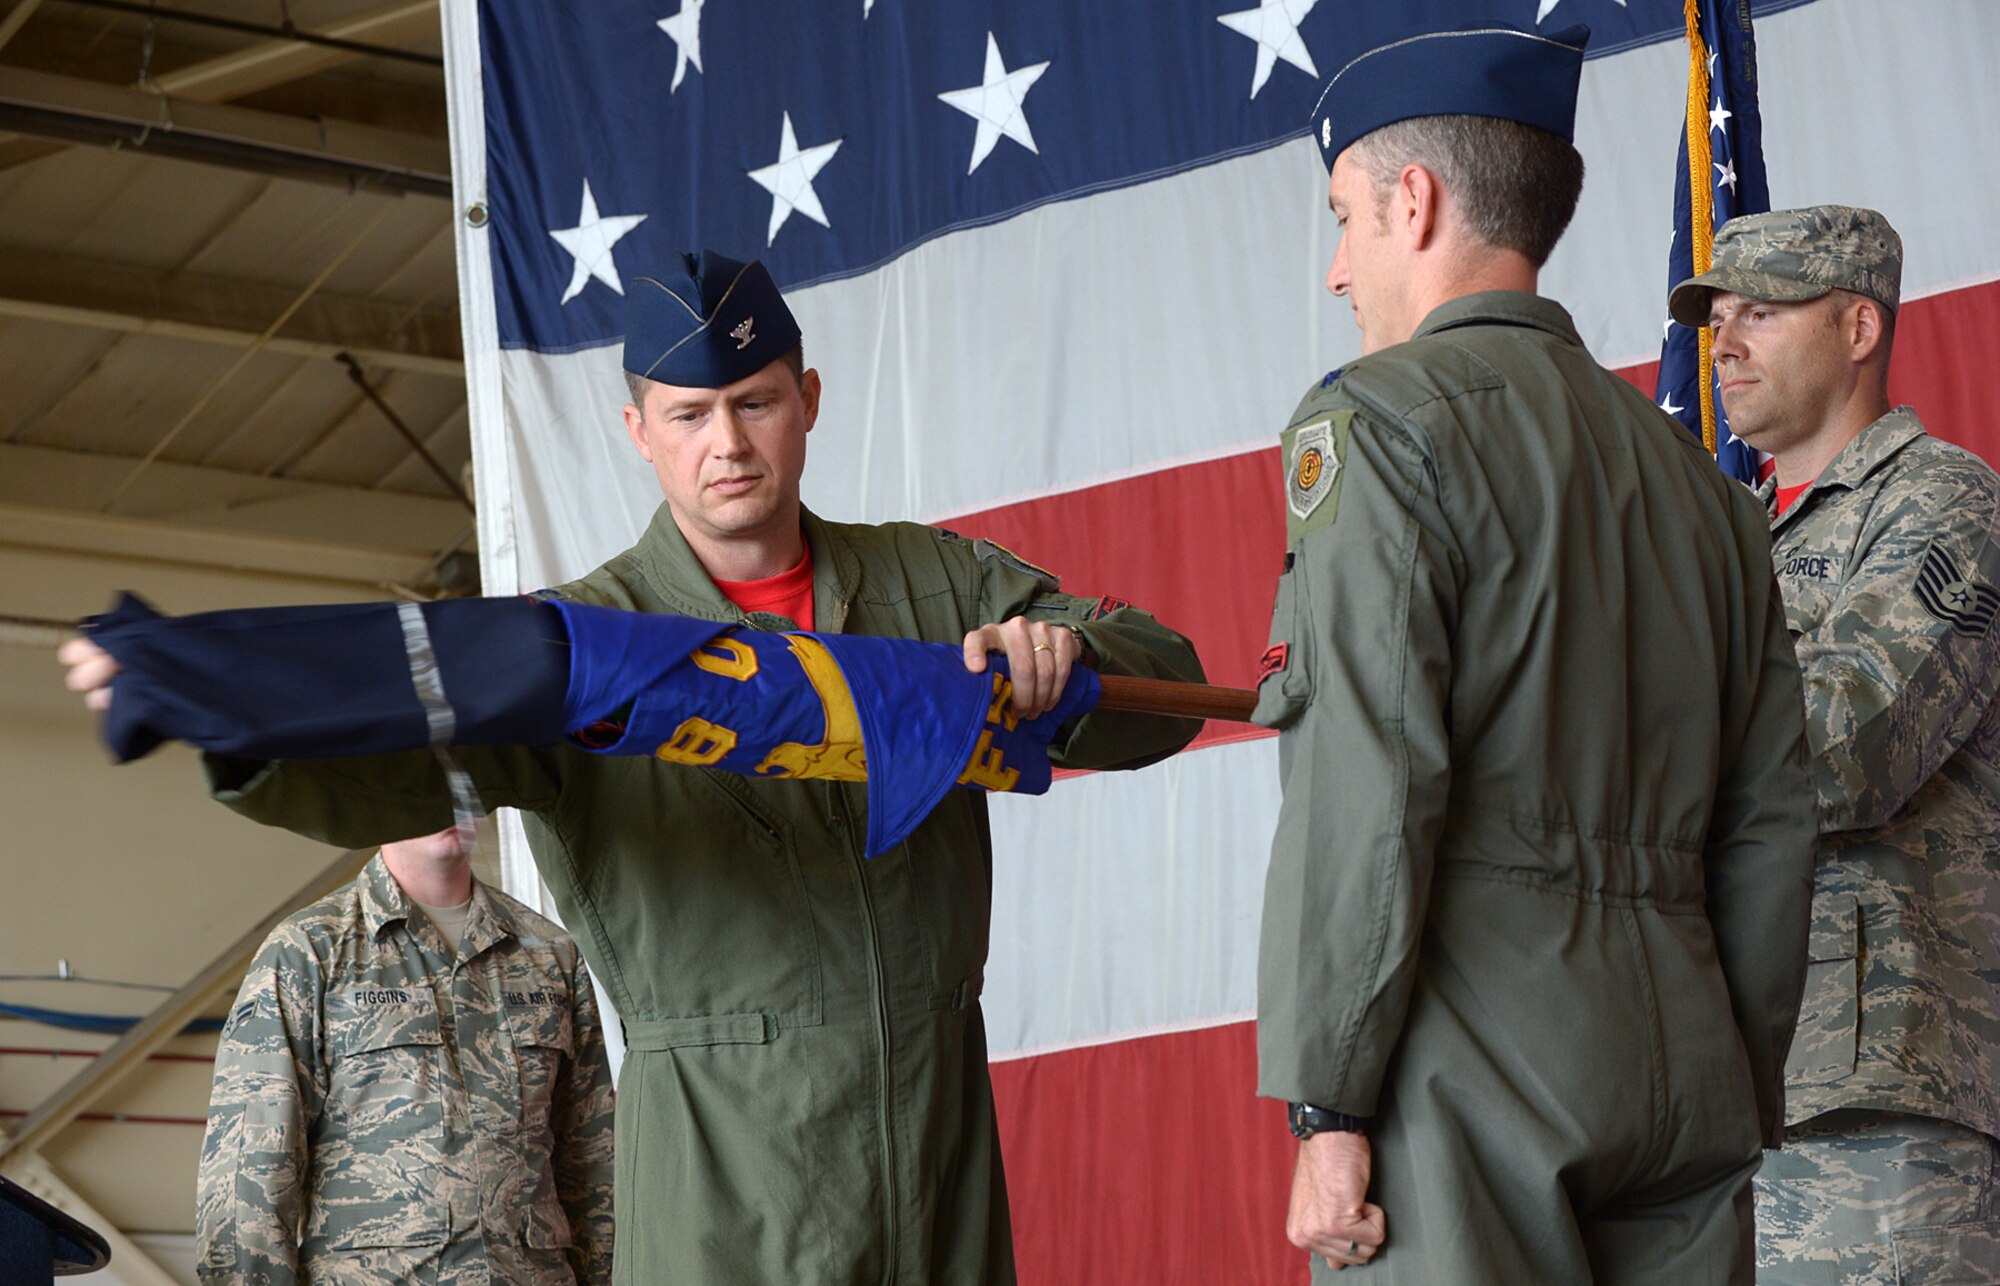 Col. David B. Lyons unfurls the 34th Fighter Squadron’s guidon during its activation ceremony July 17 at Hill Air Force Base, Utah. The 34th will be the first combat squadron to fly the Air Force’s newest fighter aircraft, the F-35A. The F-35A is the U.S. Air Force's latest fifth-generation fighter. With its aerodynamic performance and advanced integrated avionics, it will provide next-generation stealth, enhanced situational awareness, and reduced vulnerability for the United States and allied nations. The 34th’s first F-35A will arrive in September. (U.S. Air Force photo by Alex R. Lloyd/Released)